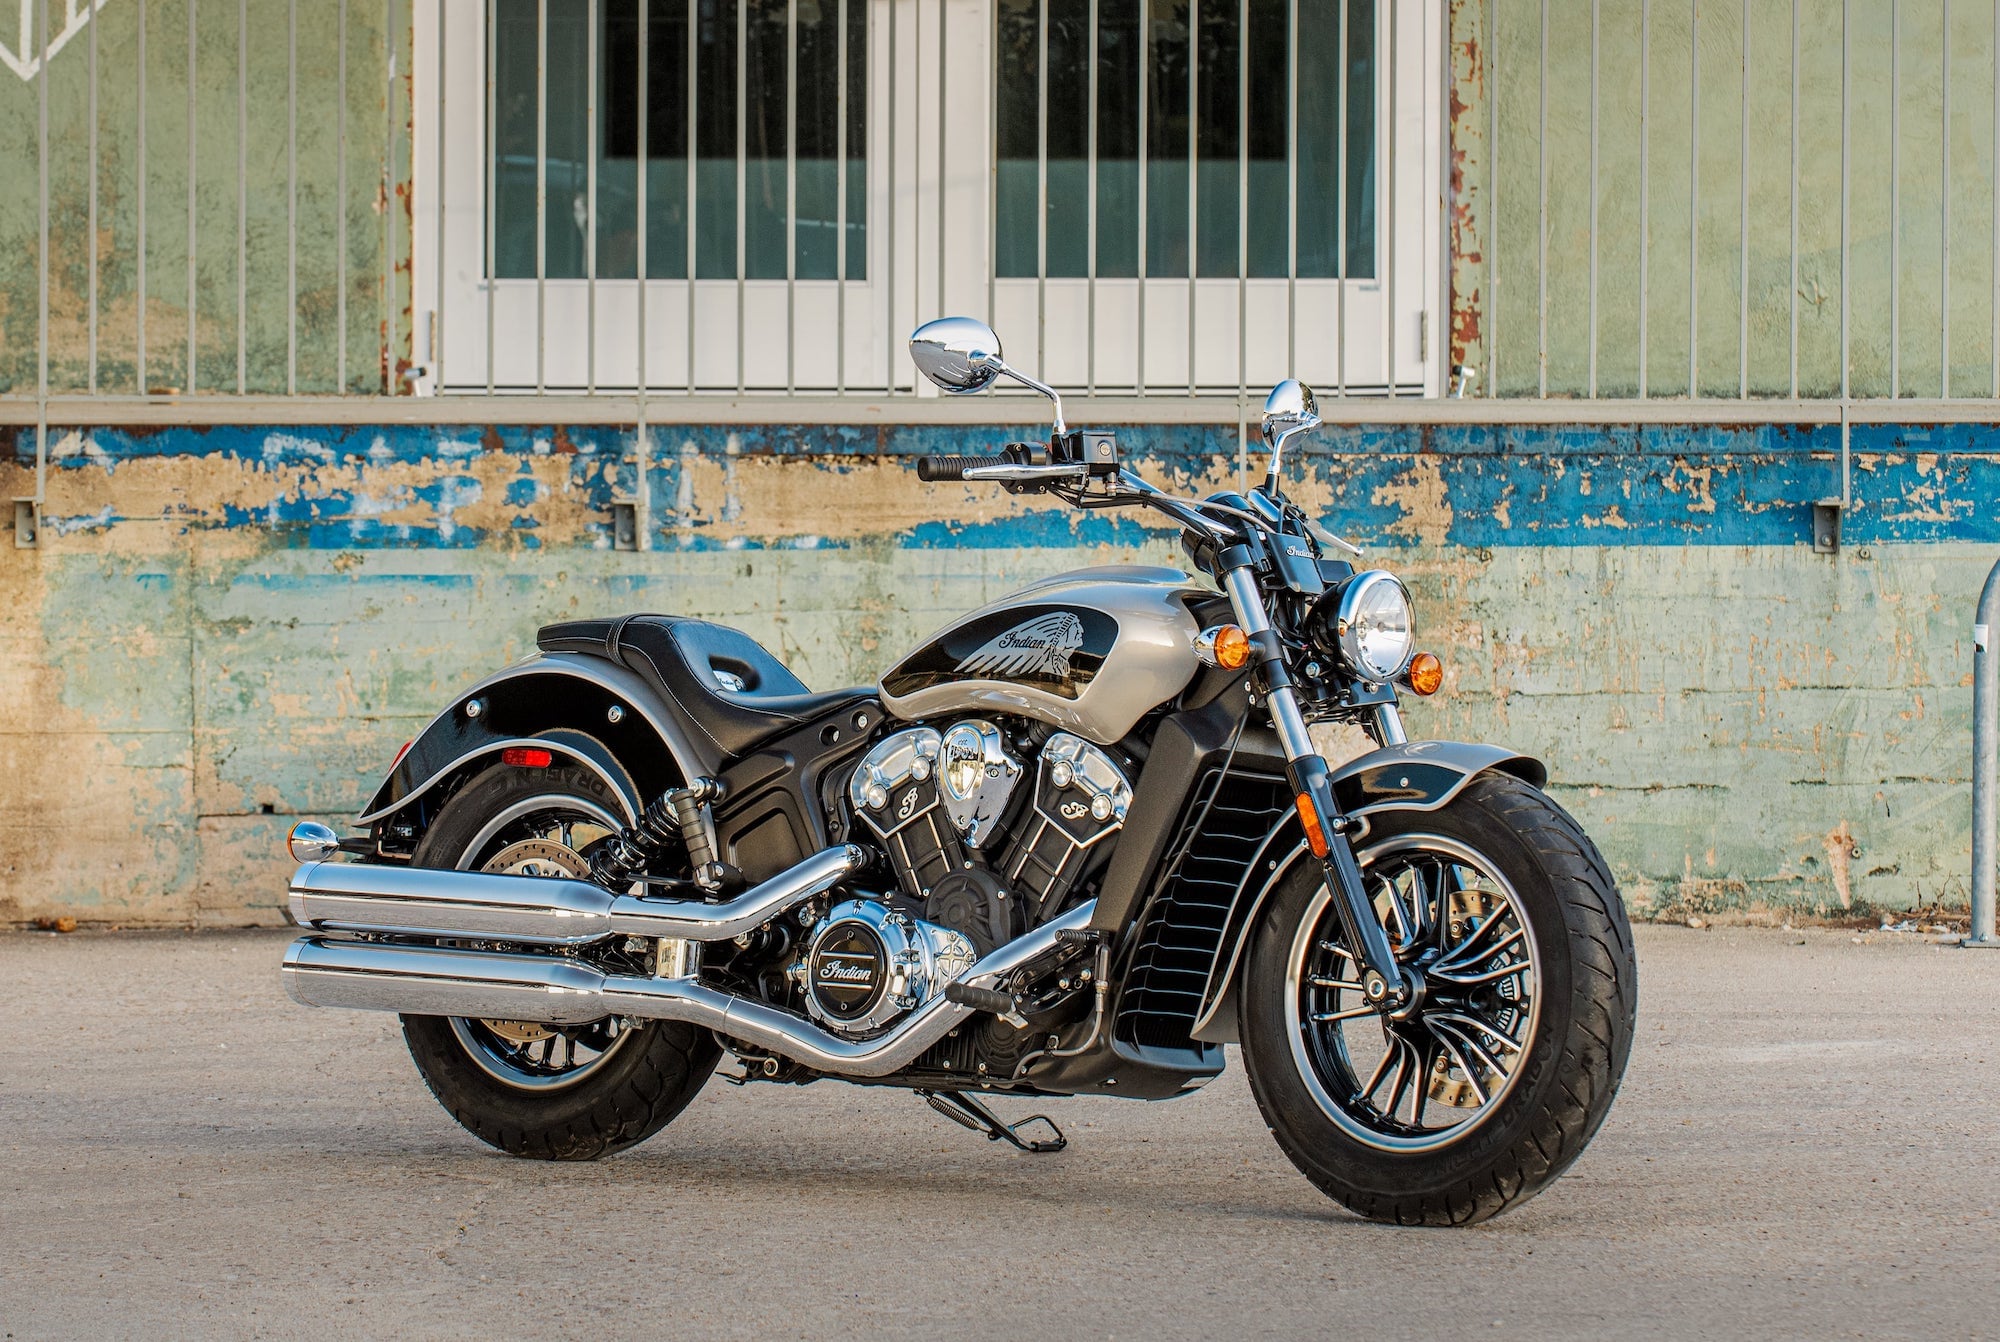 2022 Indian Scout RHS front static